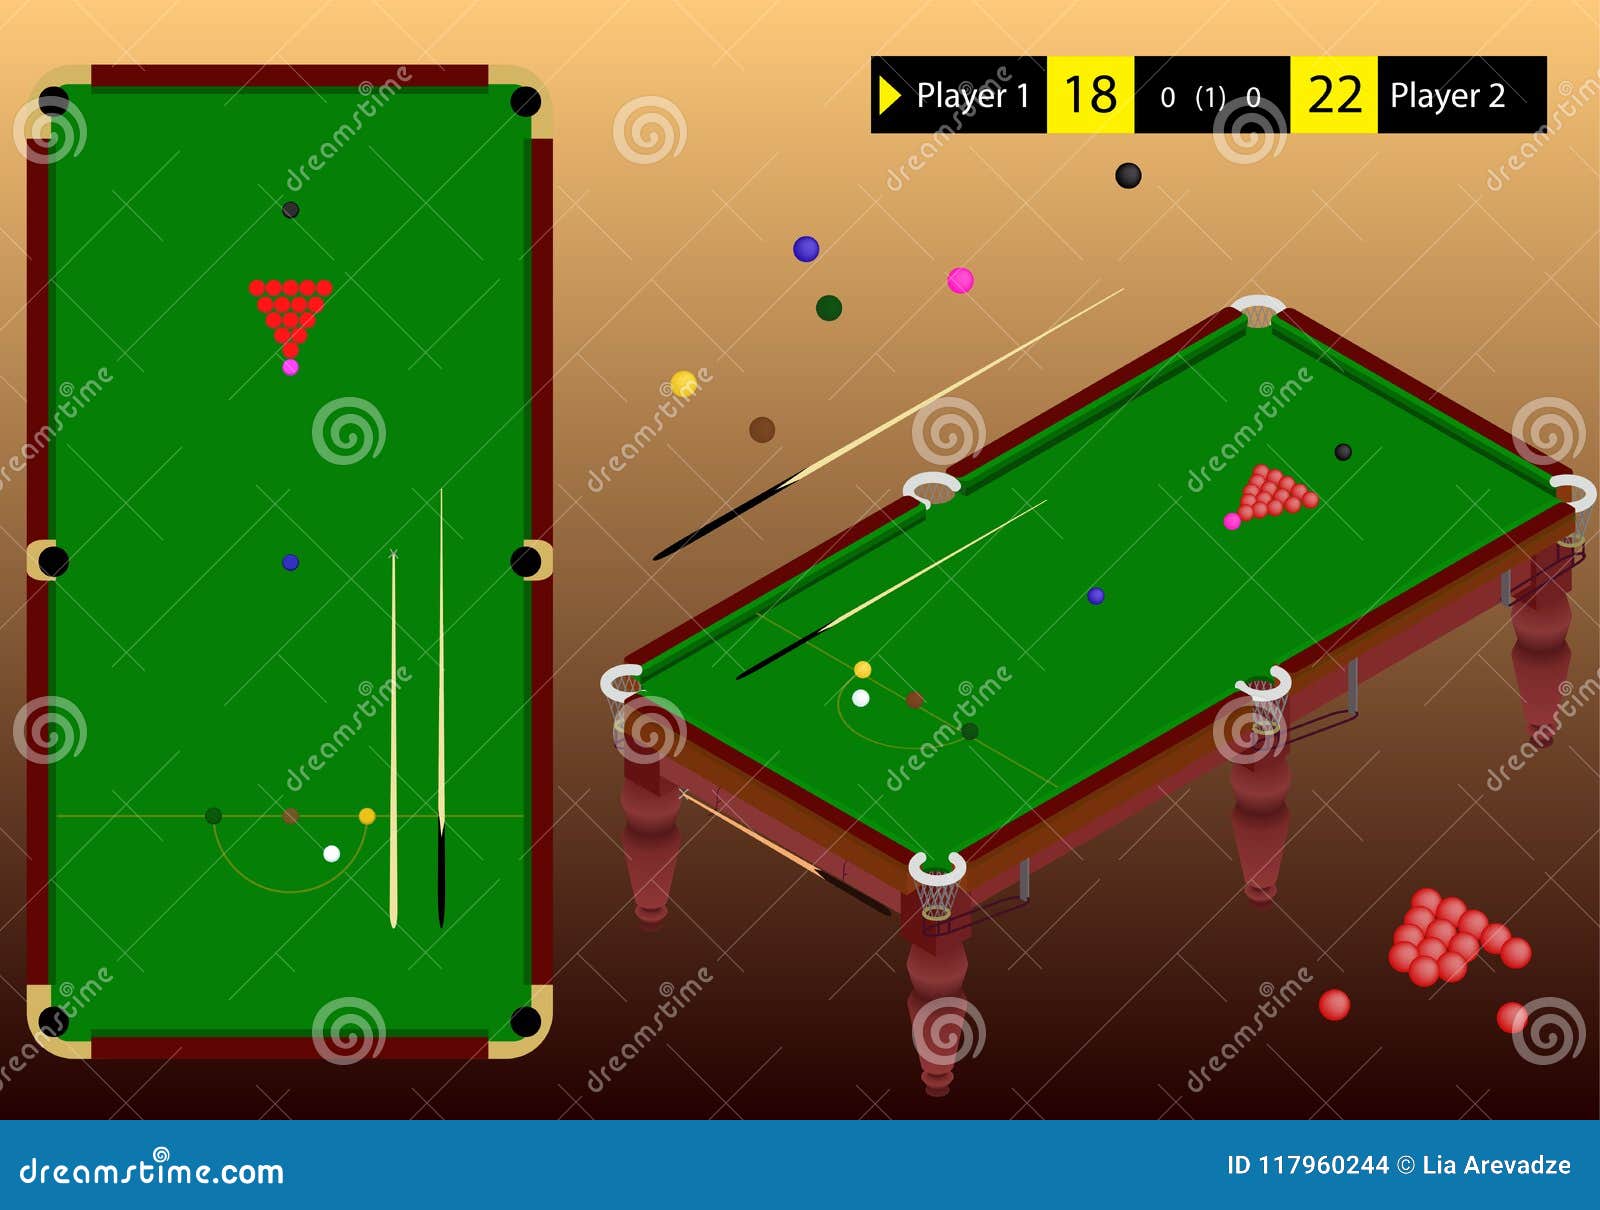 Snooker Isometric Playground Green Table, Ball, Cue Stick, and Scoreboard